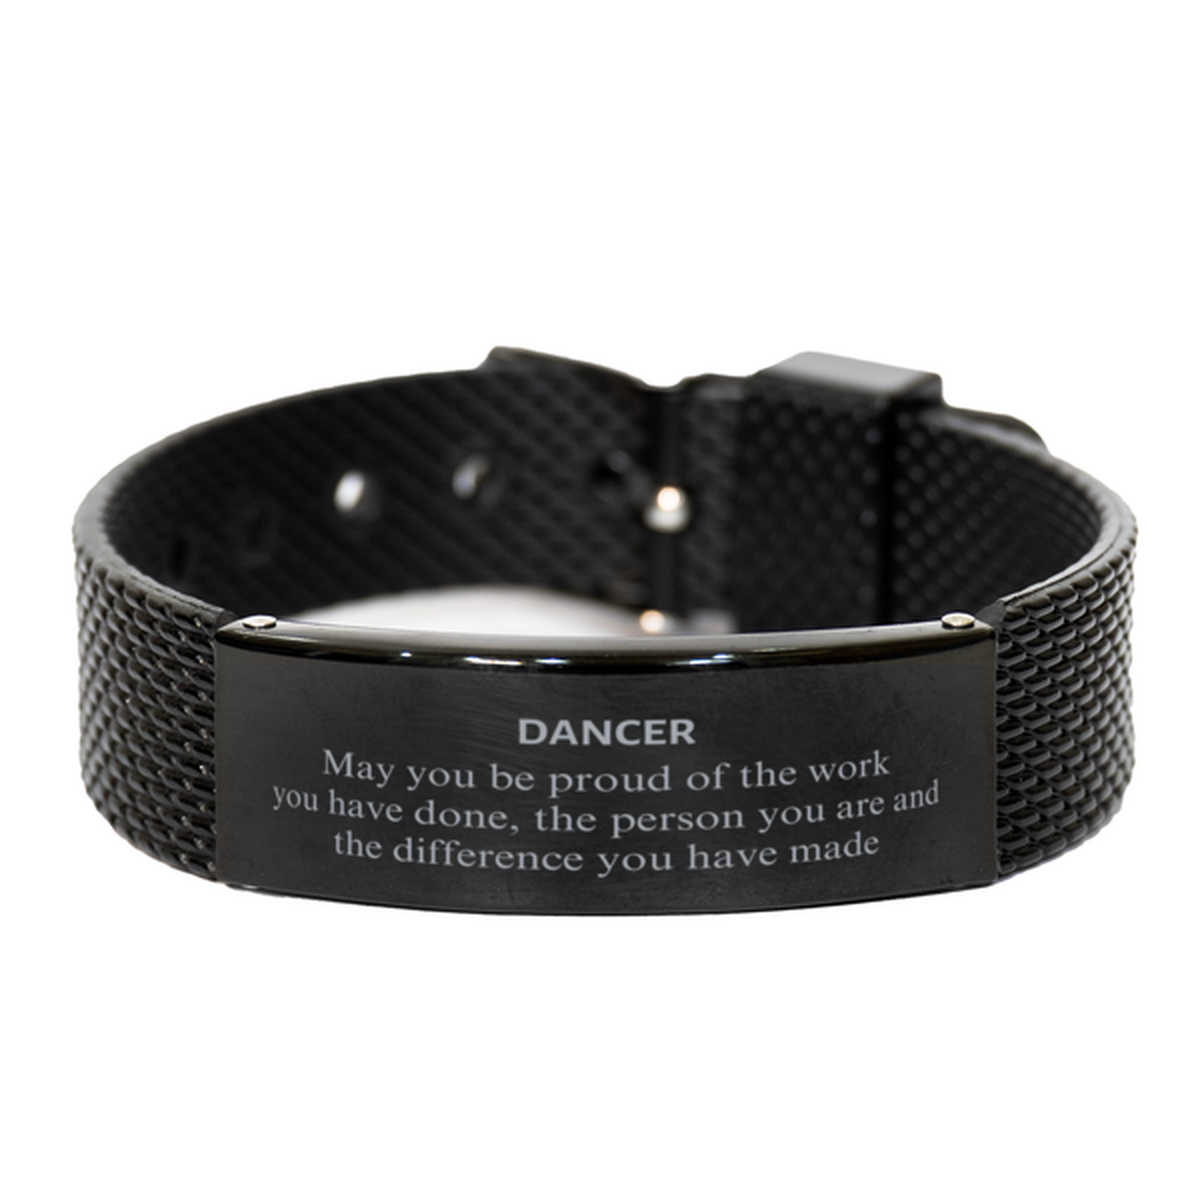 Dancer May you be proud of the work you have done, Retirement Dancer Black Shark Mesh Bracelet for Colleague Appreciation Gifts Amazing for Dancer